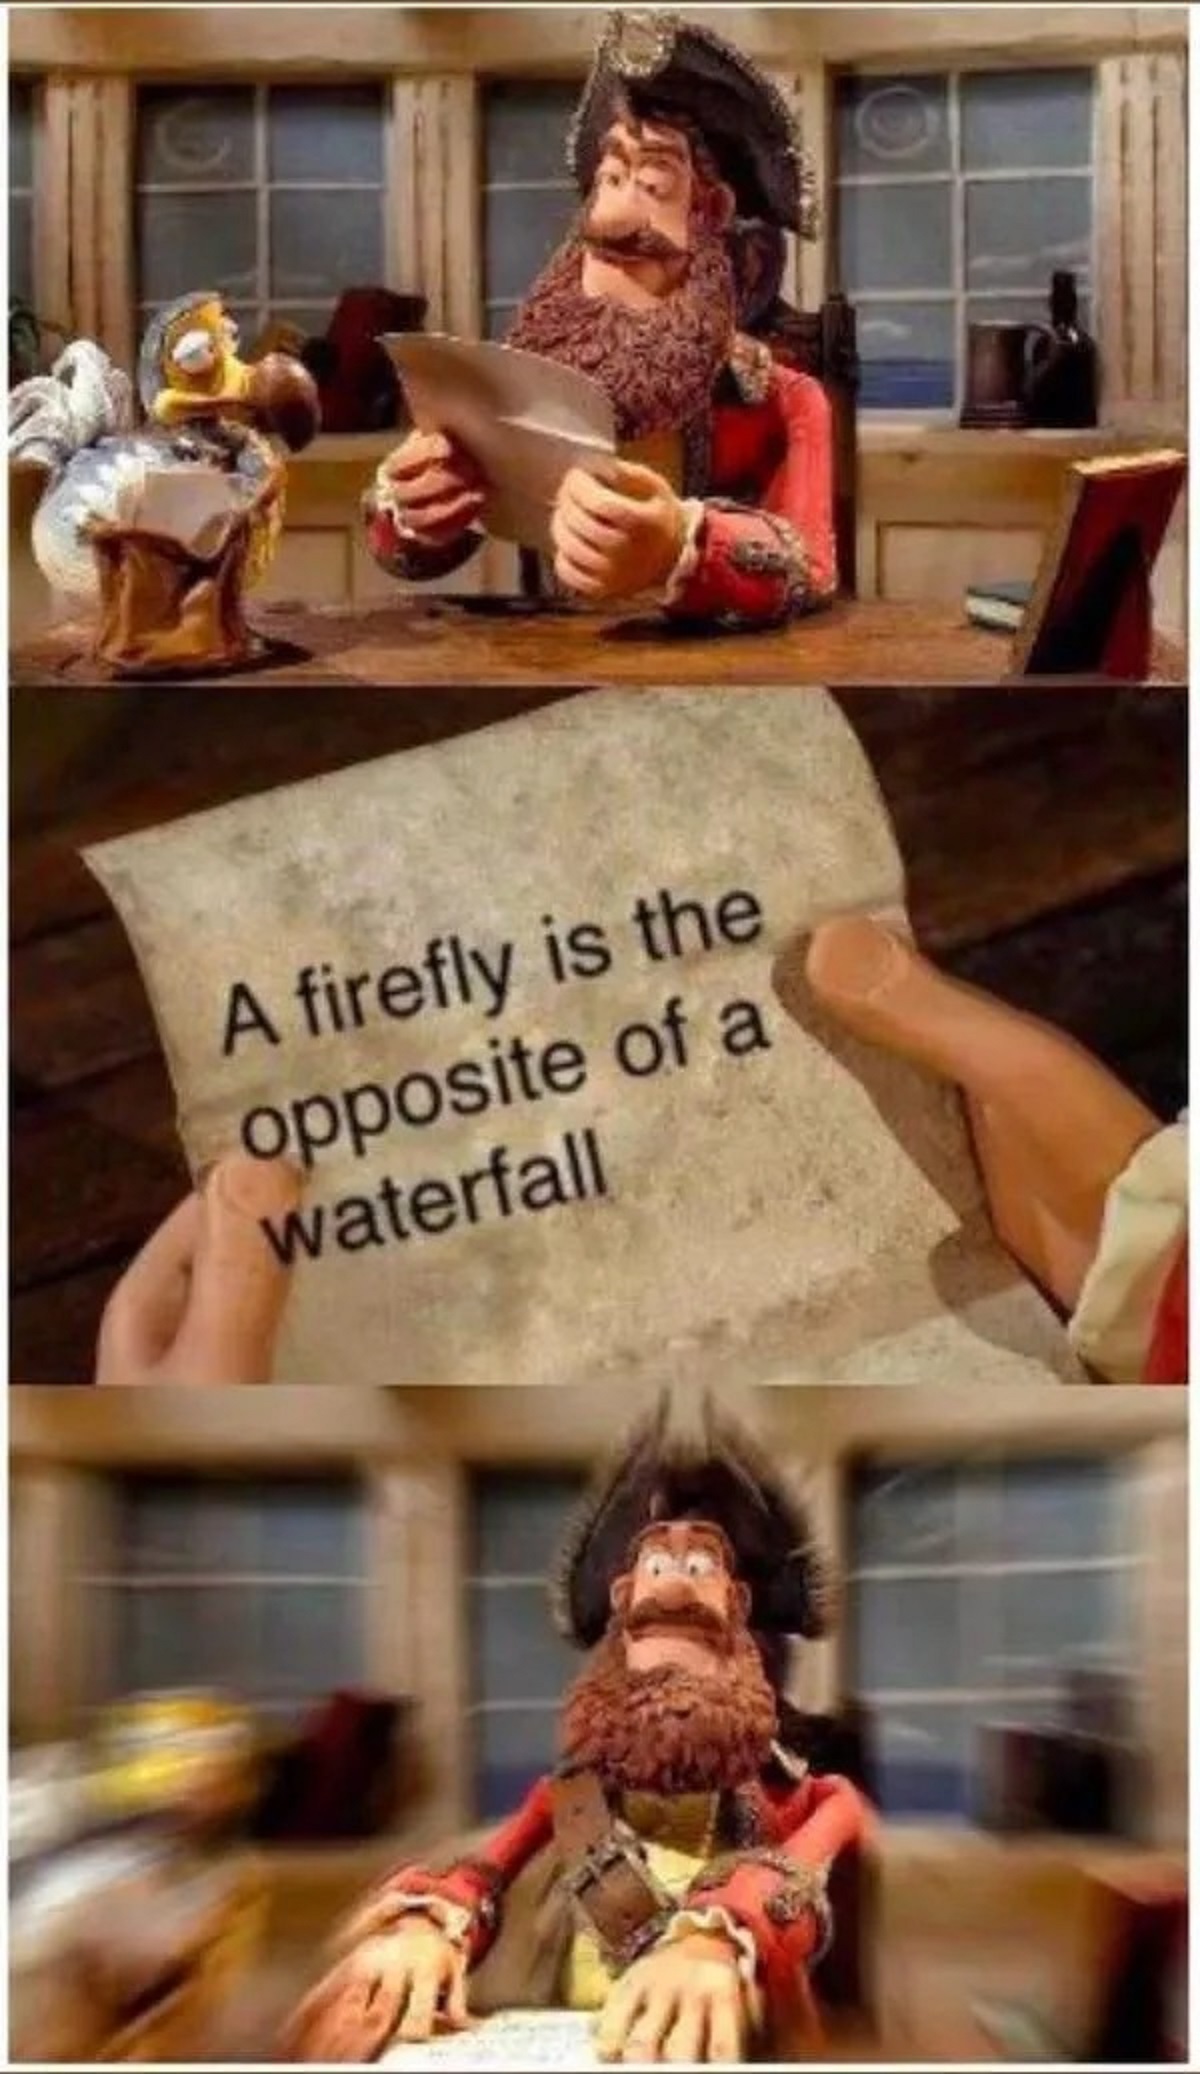 photo caption - A firefly is the opposite of a waterfall